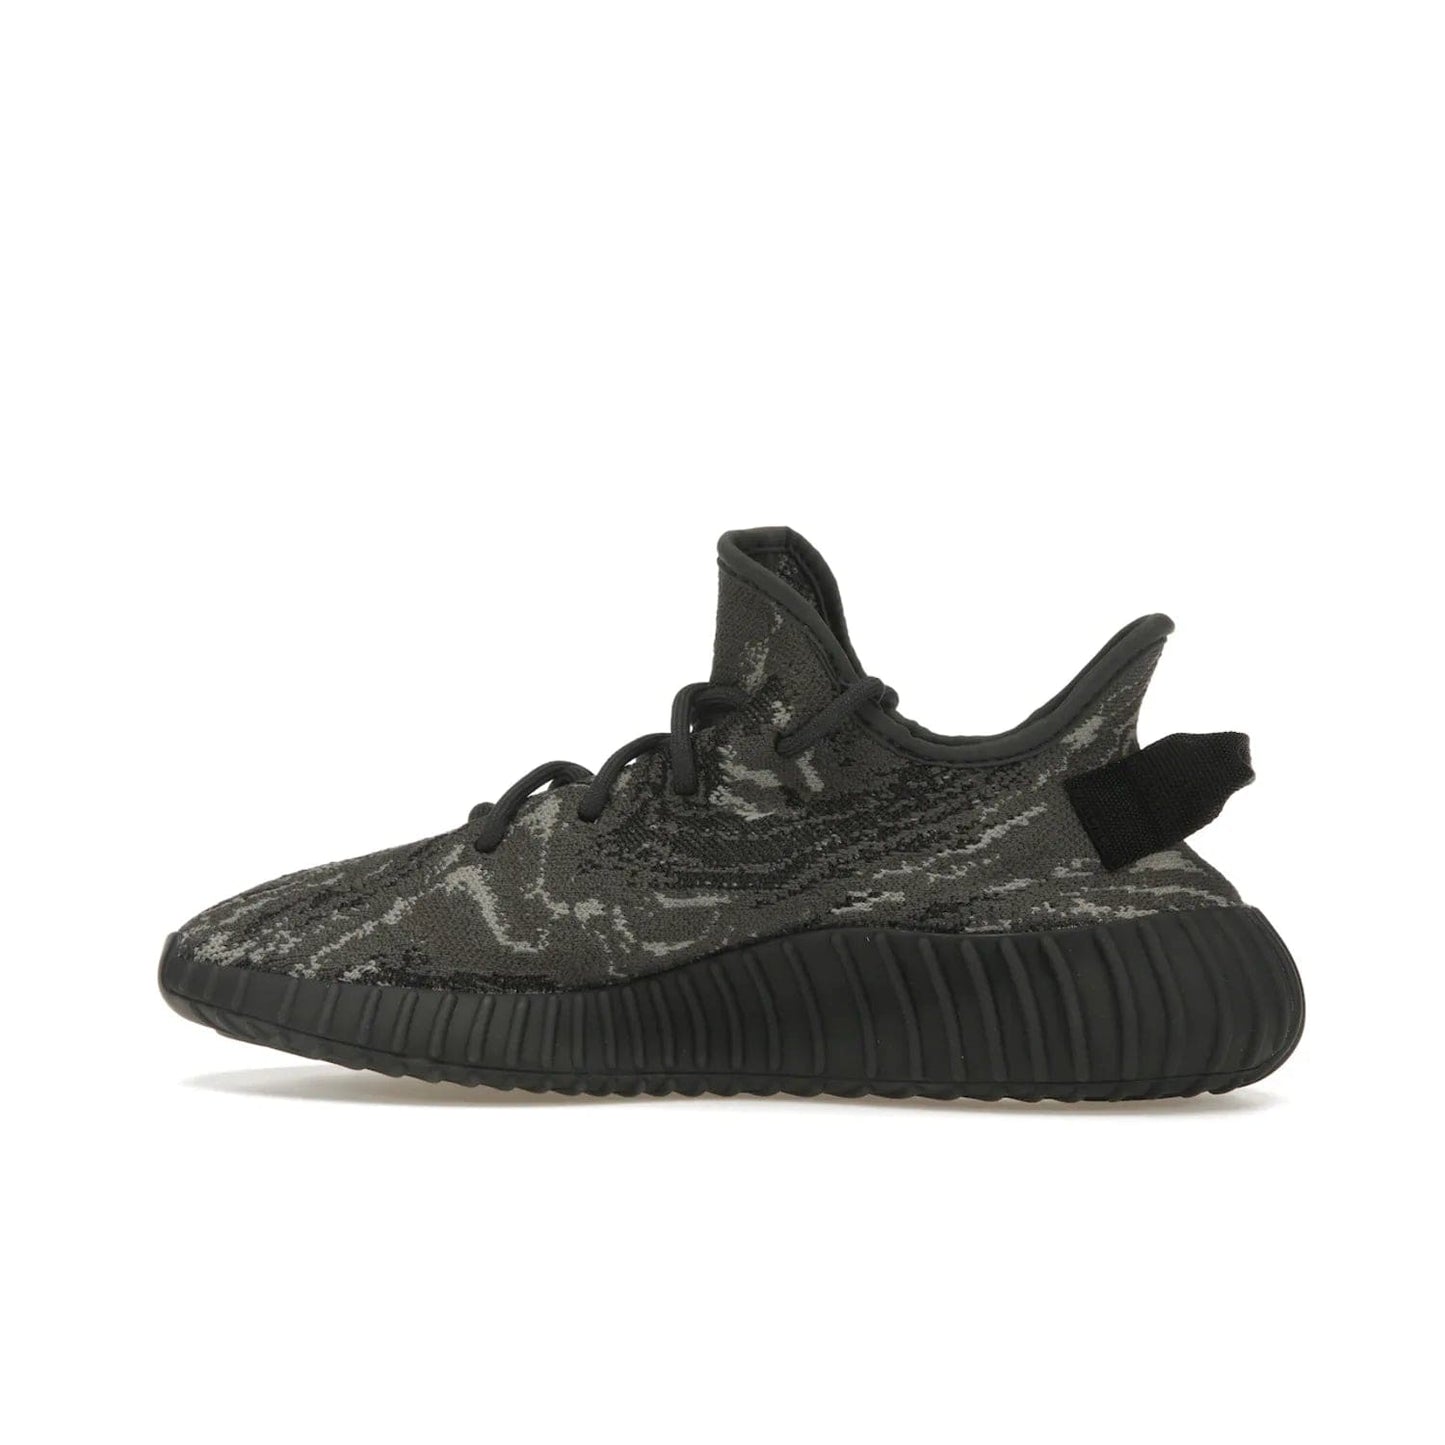 adidas Yeezy Boost 350 V2 MX Dark Salt - Image 20 - Only at www.BallersClubKickz.com - ##
The adidas Yeezy Boost 350 V2 MX Dark Salt offers a contemporary look with a signature combination of grey and black hues. Cushioned Boost midsole and side stripe allow for all day wear. Get the perfect fashion-forward addition with this sleek sneaker for $230.